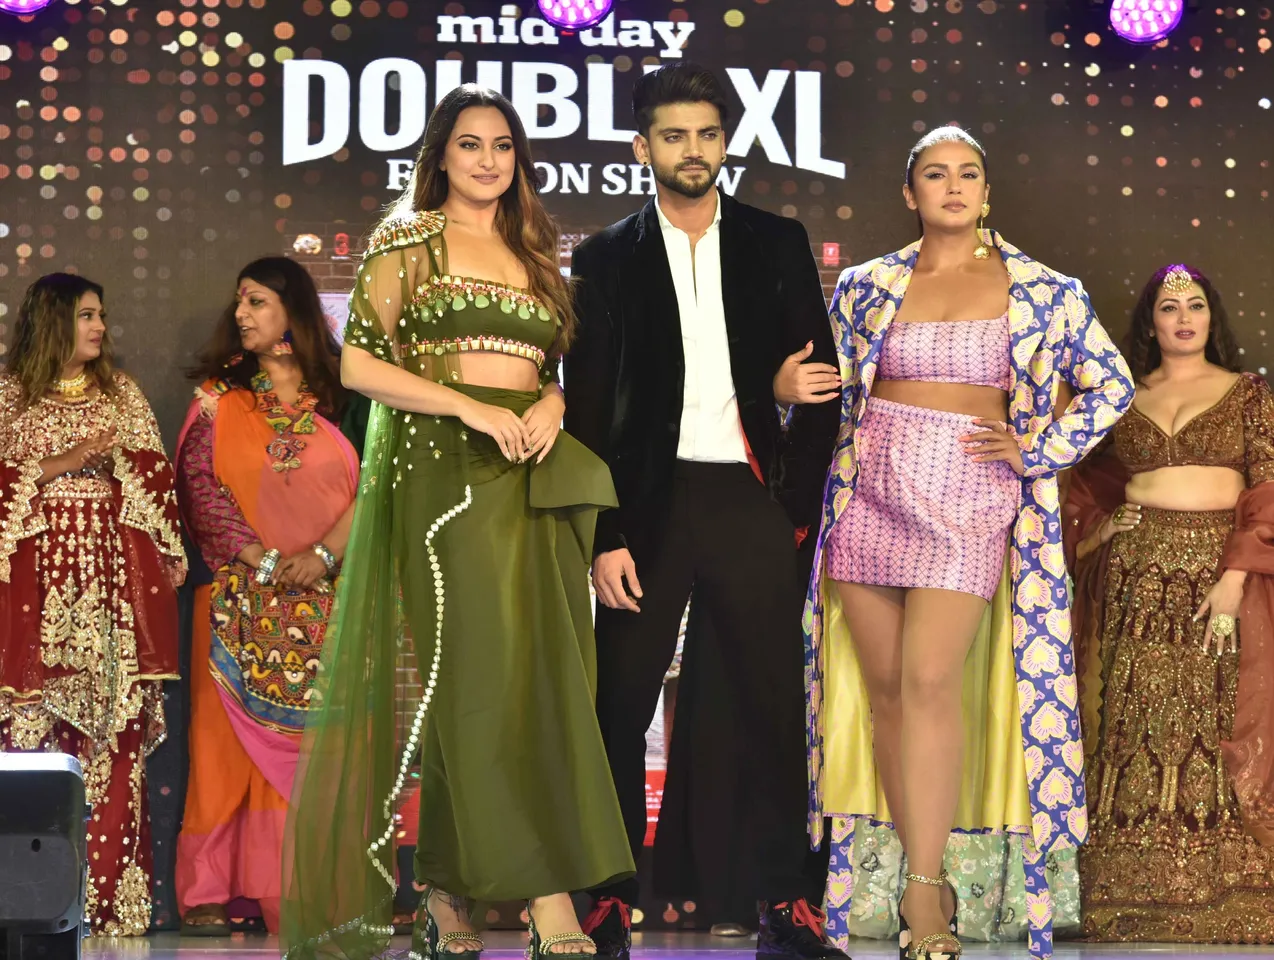 Sonakshi Sinha's ramp-walk with 'good friend' Zaheer Iqbal turns out to be a sensational climax of mid-day glitz and glam Icon 2022 event